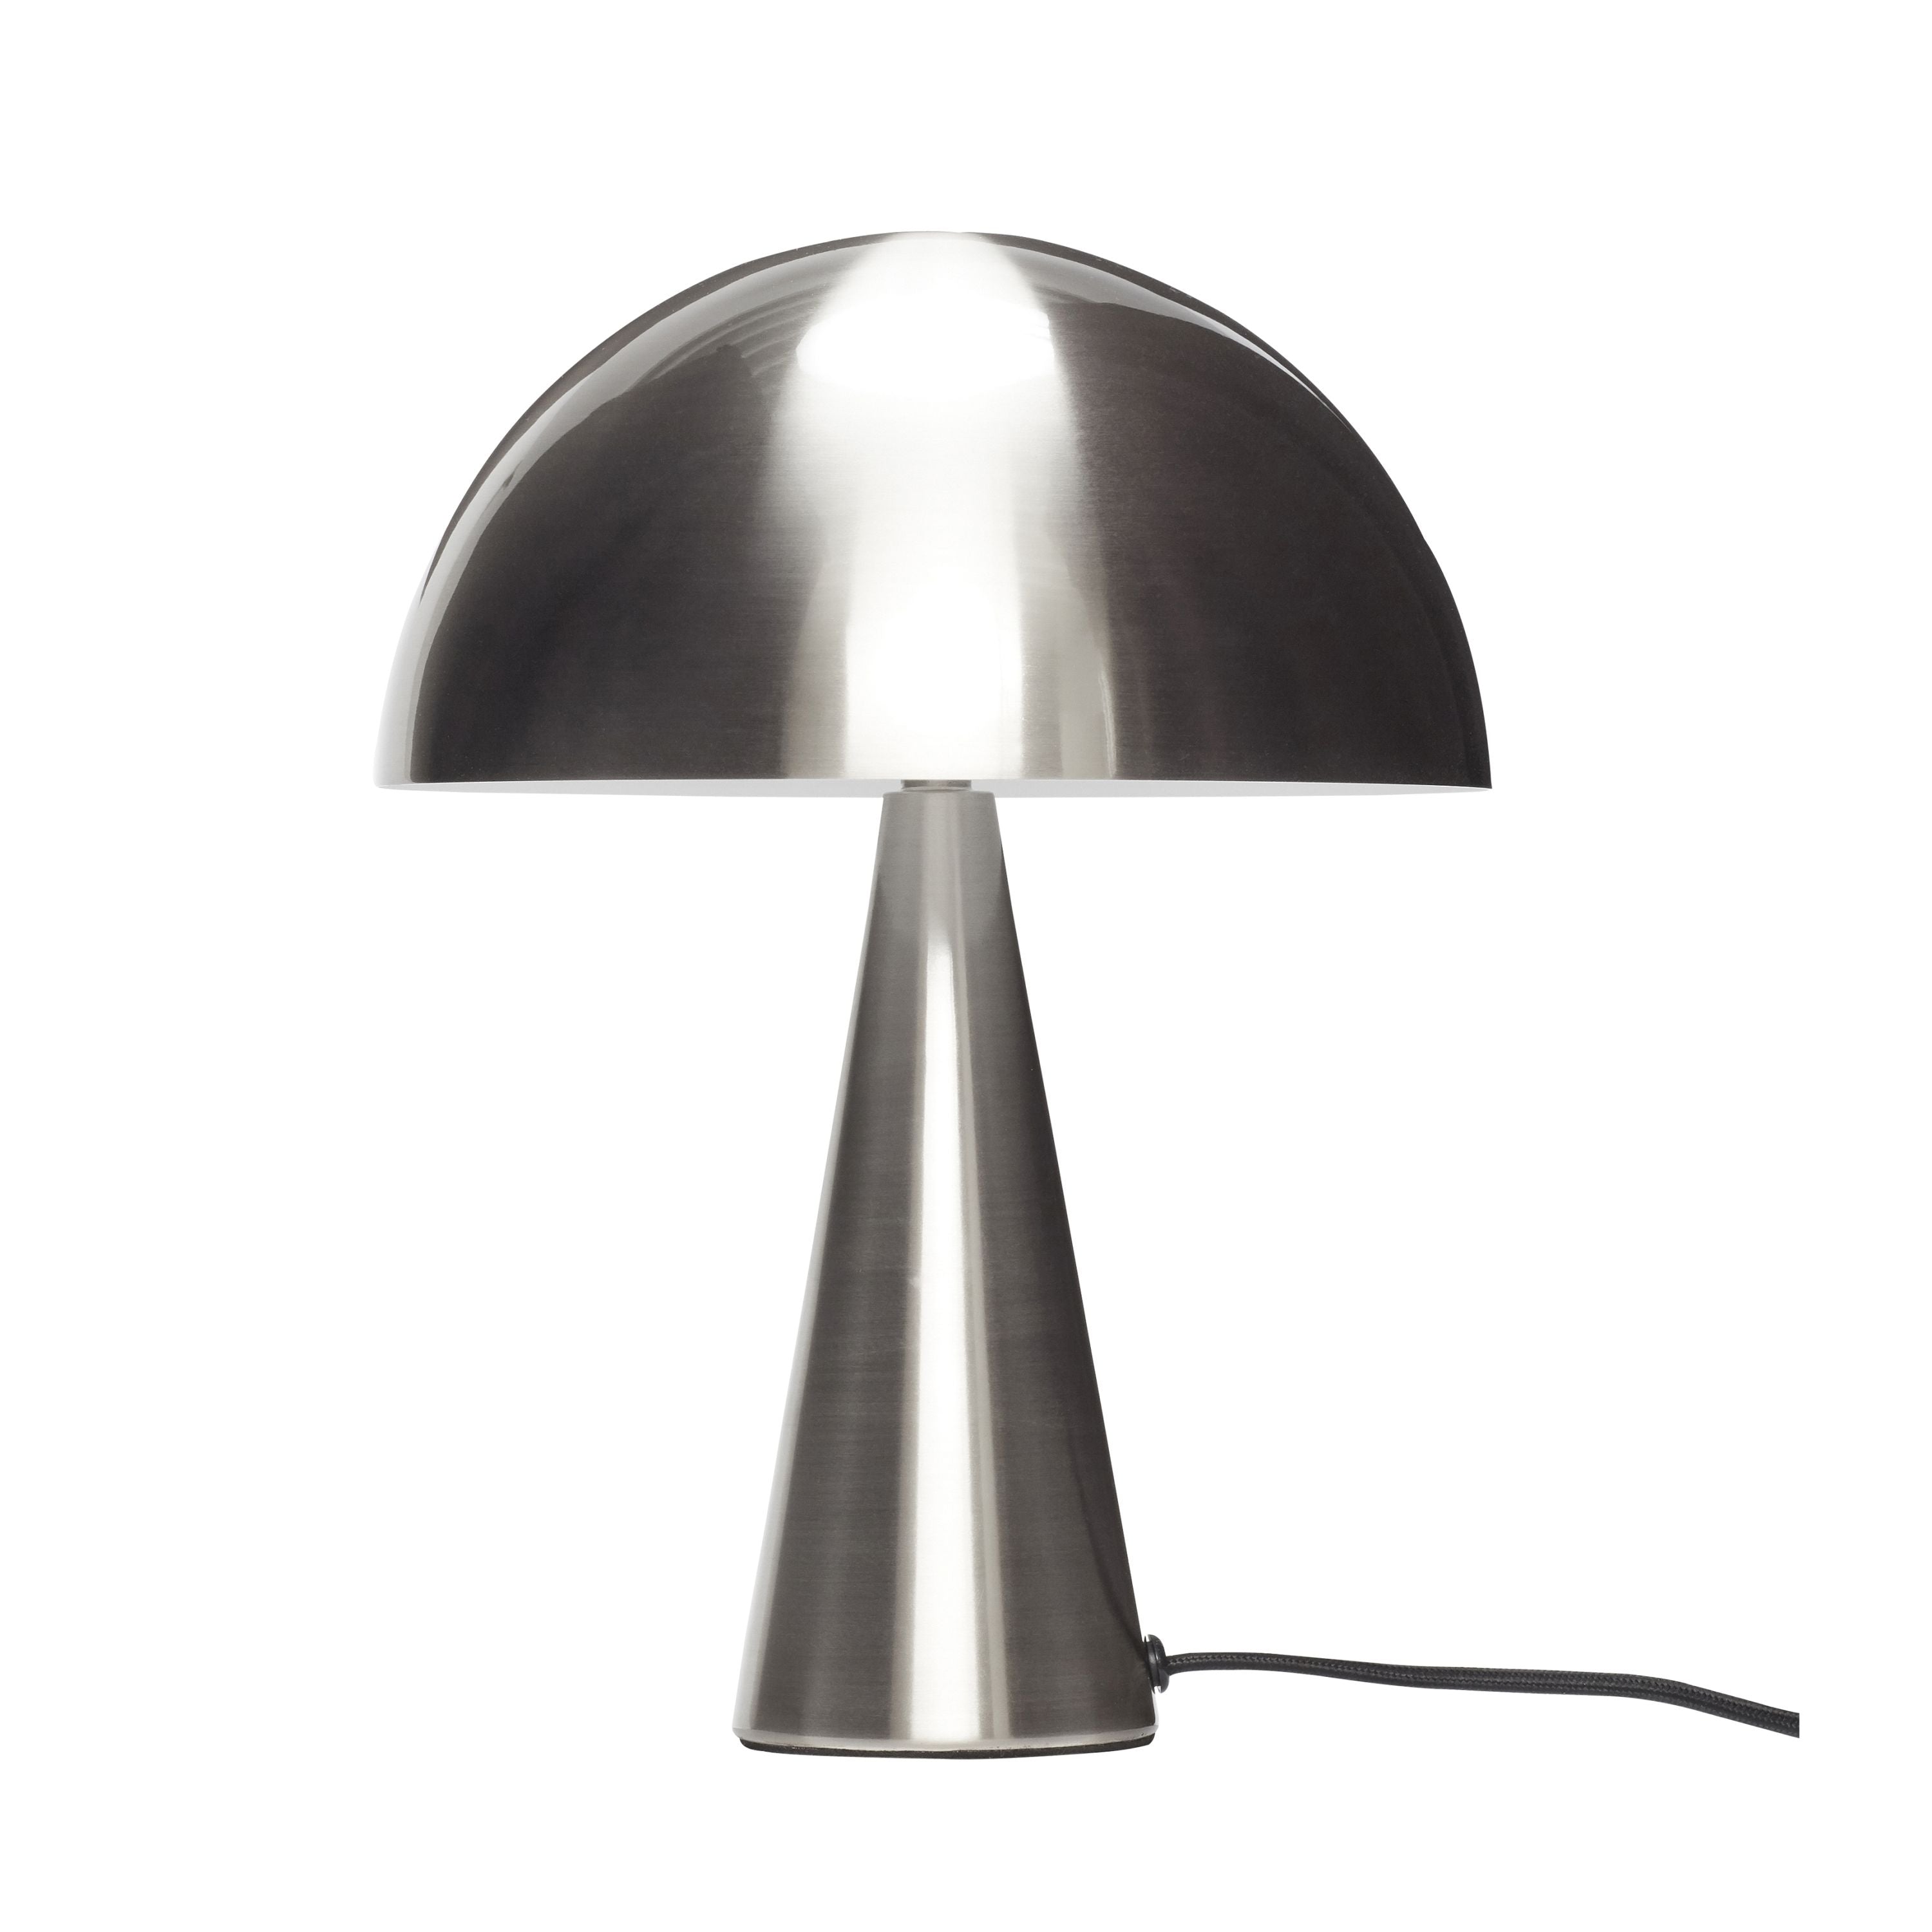 This table lamp is made of black metal painted and has a fungal -like shape. The white interior of the lampshade reflects the light well. You can put the lamp in a window, on a shelf or table. A modern living room is an ideal space to insert it to give a somewhat cozy muffled light. The minimalist office, or the Scandinavian bedroom, are spaces that will become more elegant thanks to simple colors.